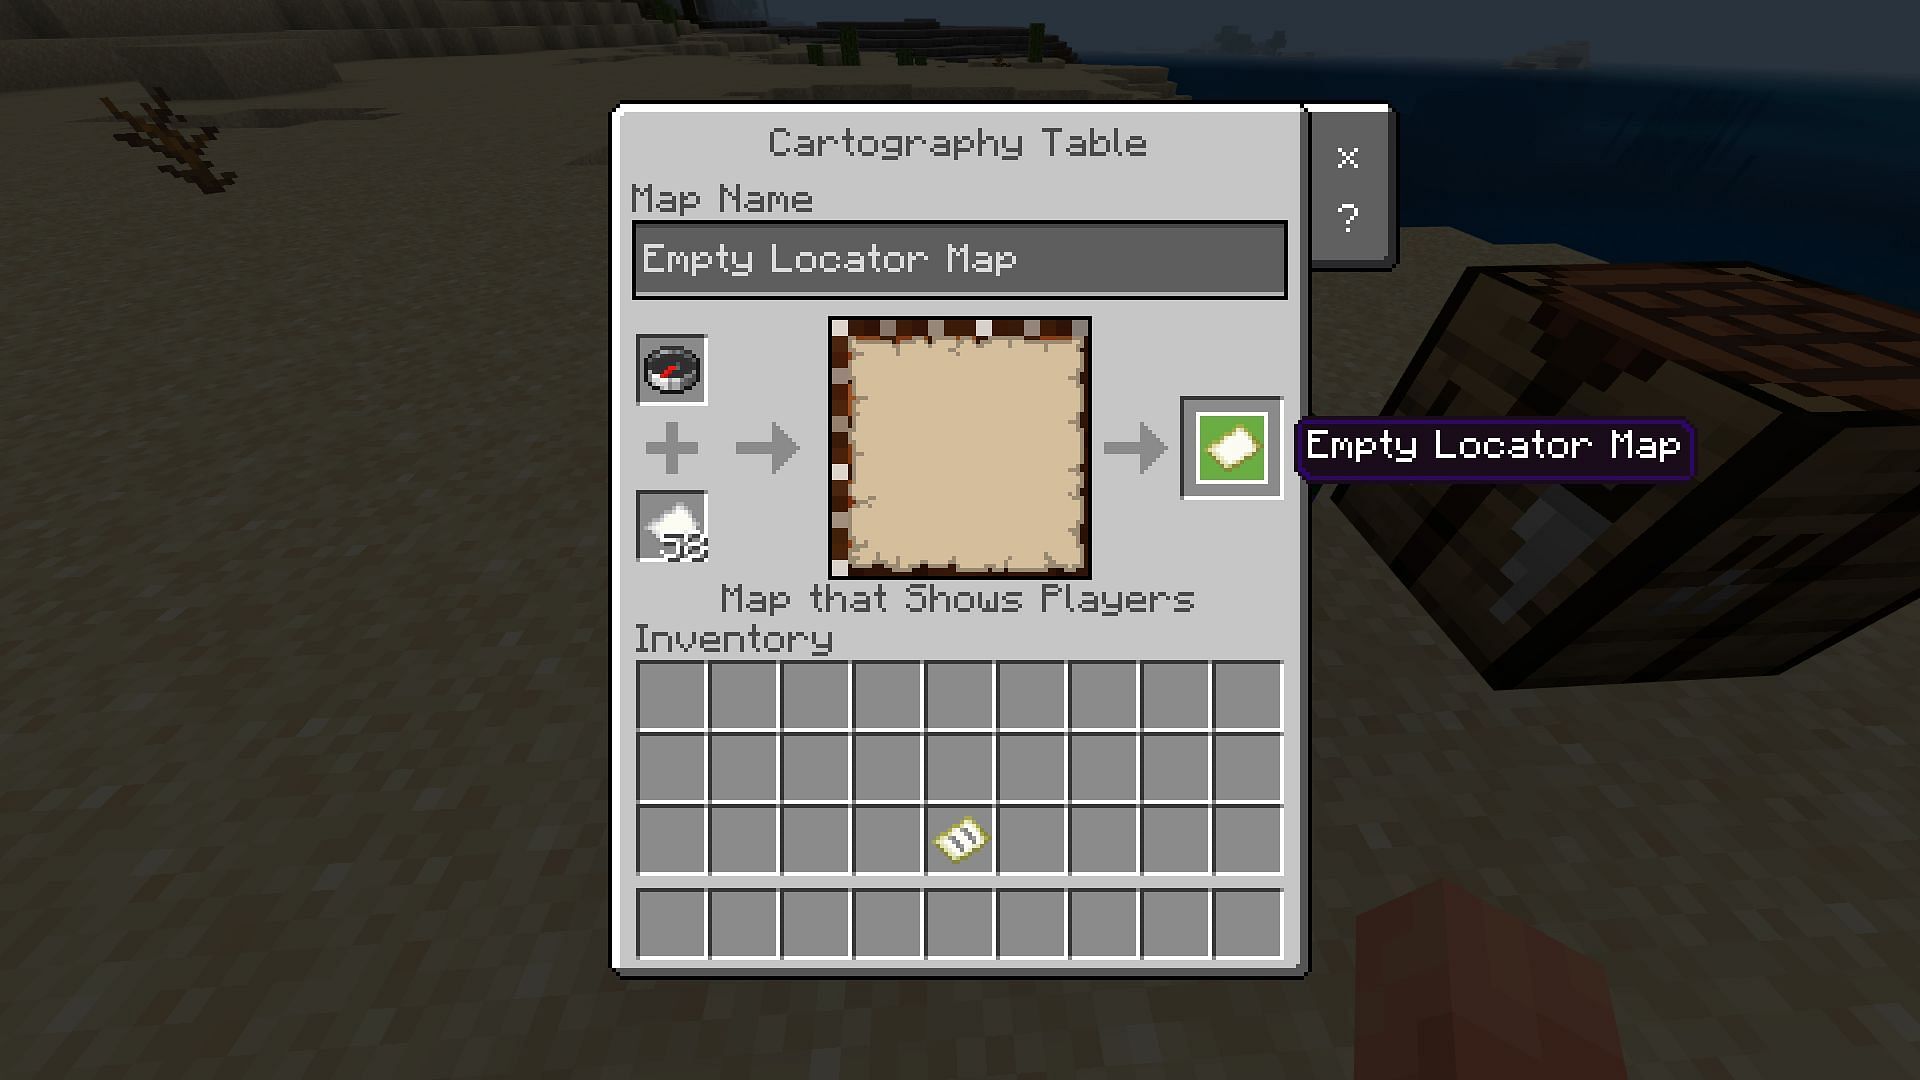 Cartography table recipe for locator map (Image via Minecraft 1.19)